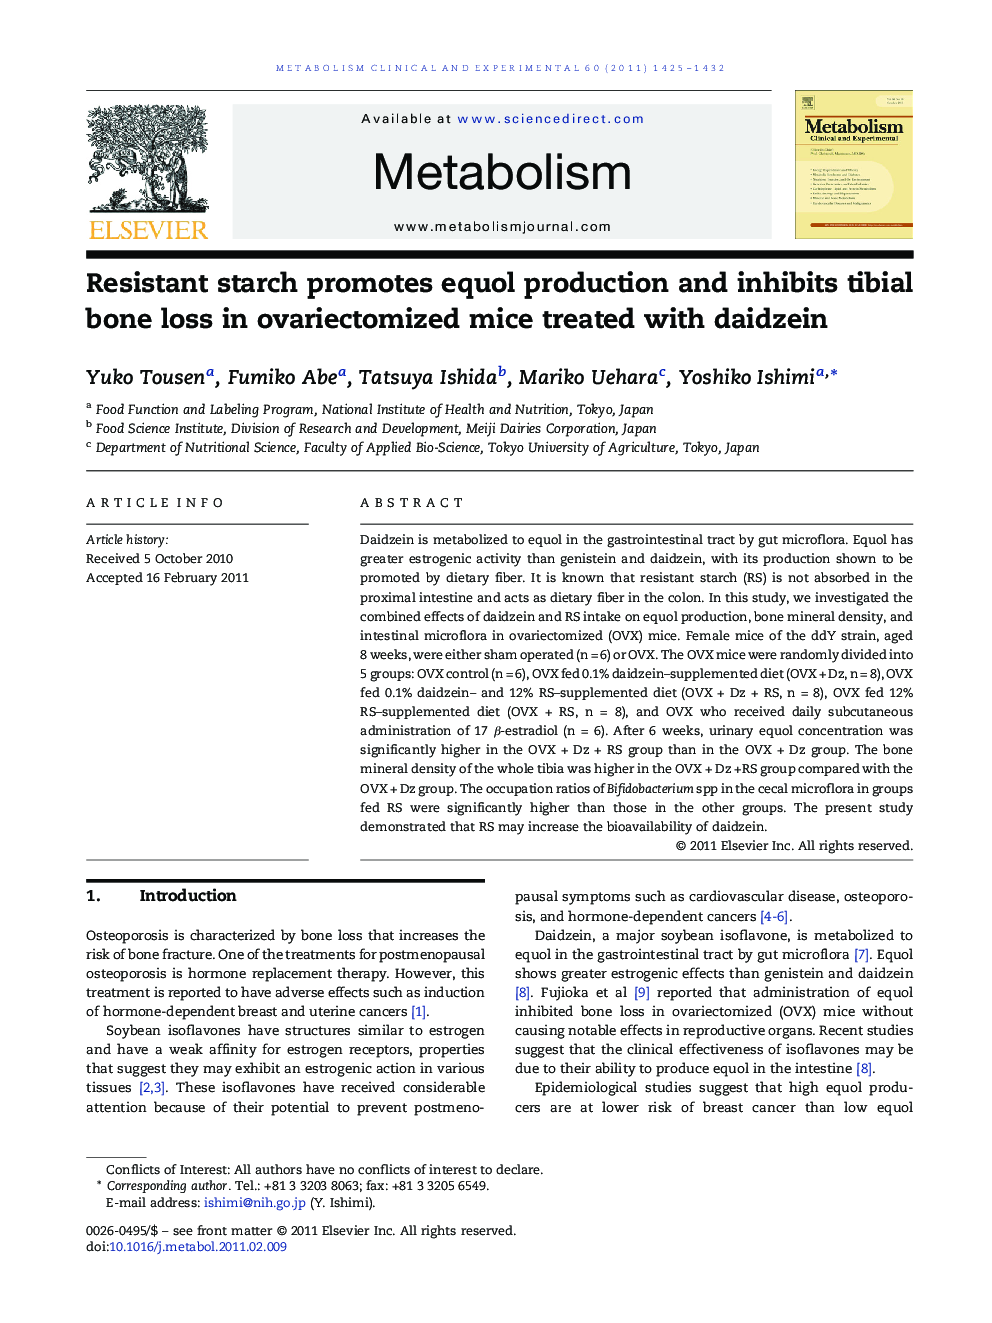 Resistant starch promotes equol production and inhibits tibial bone loss in ovariectomized mice treated with daidzein